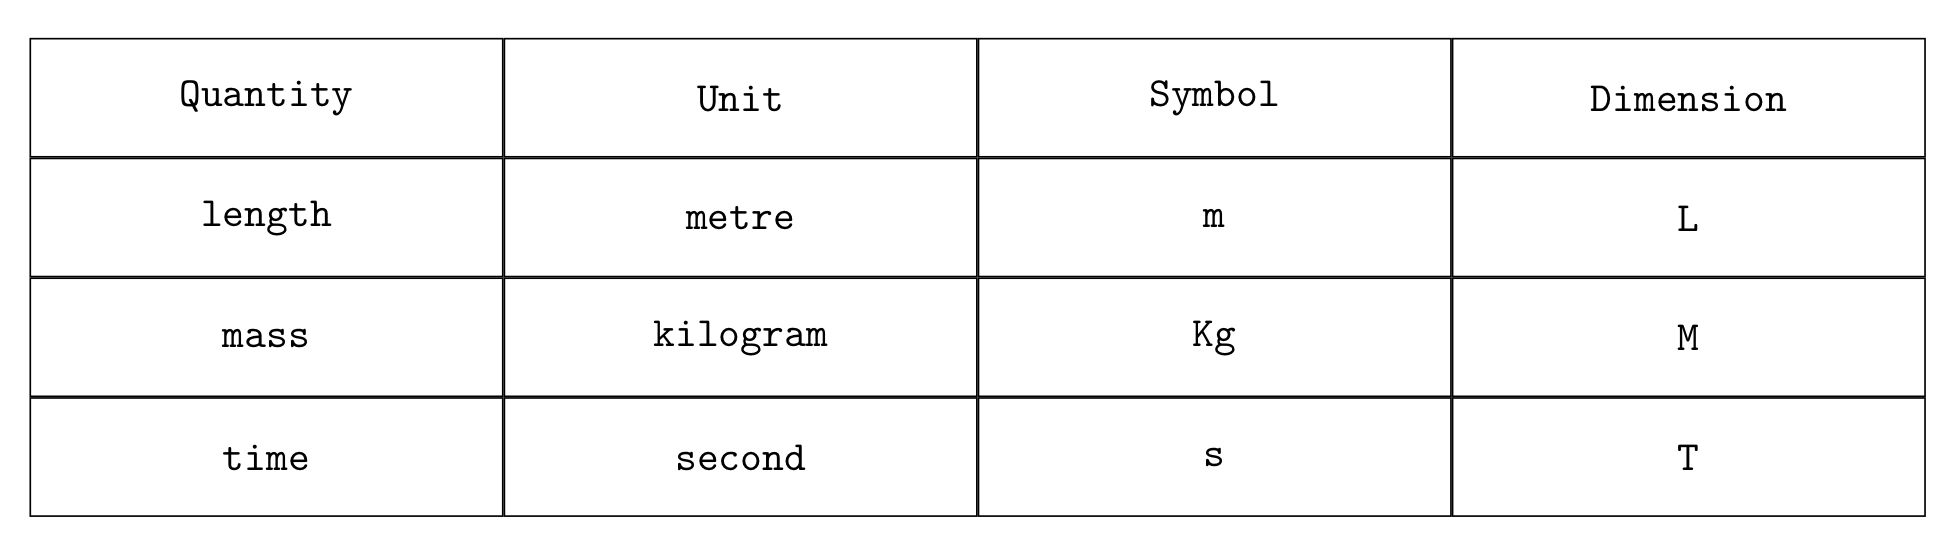 Table of units